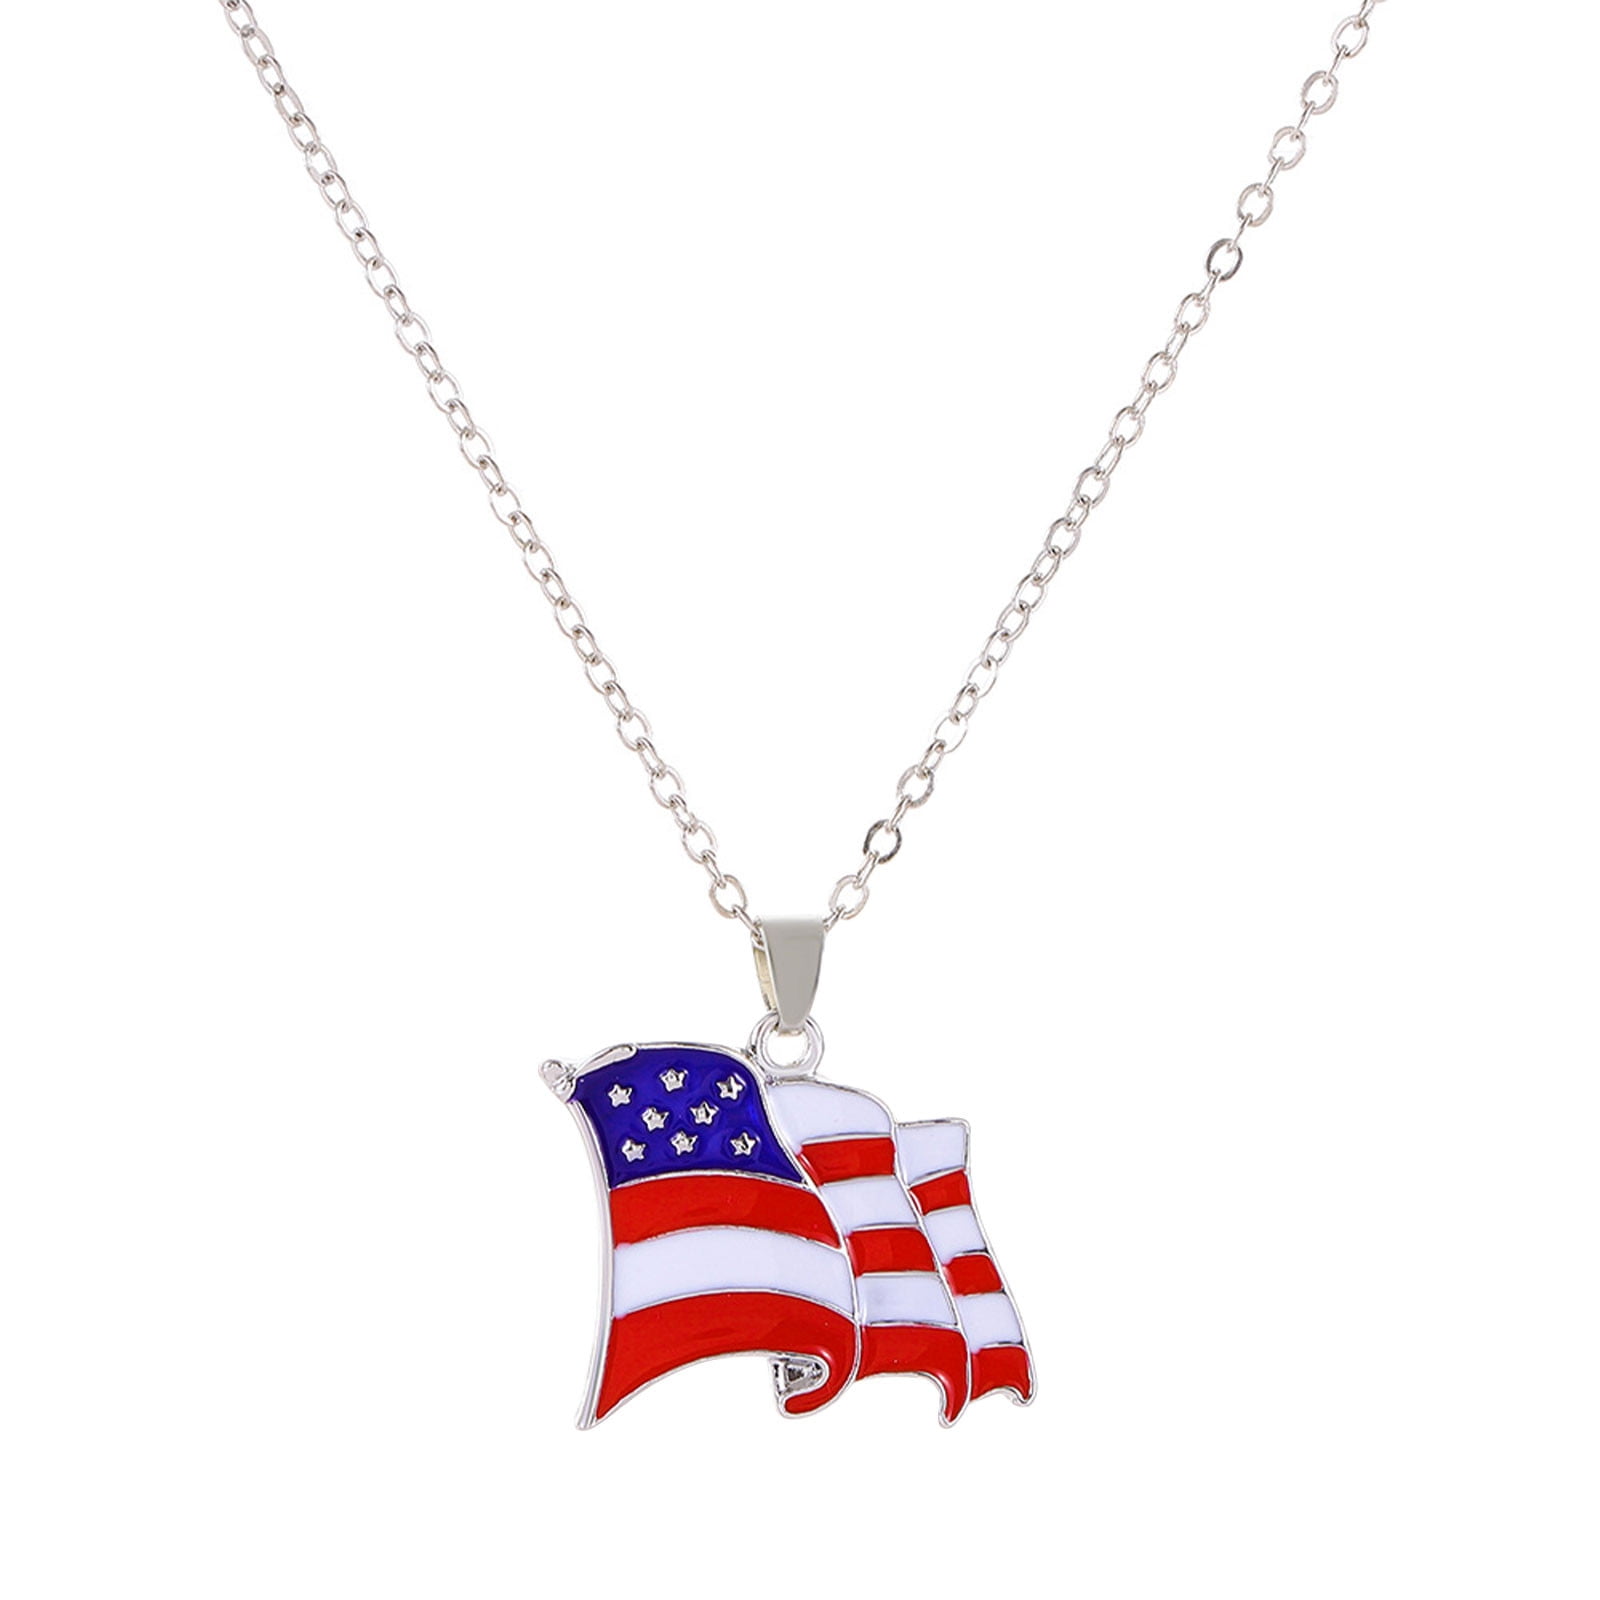 Midsumdr 4th of July Necklaces for Women Patriotic American Flag Heart Shape Necklace Red White and Blue Necklace Memorial Day Gift Jewelry Accessory 97a36504 e018 47ff bb2b f9a3b1a3897b.8e50d1b97d839184f6ee8f41ffba9810